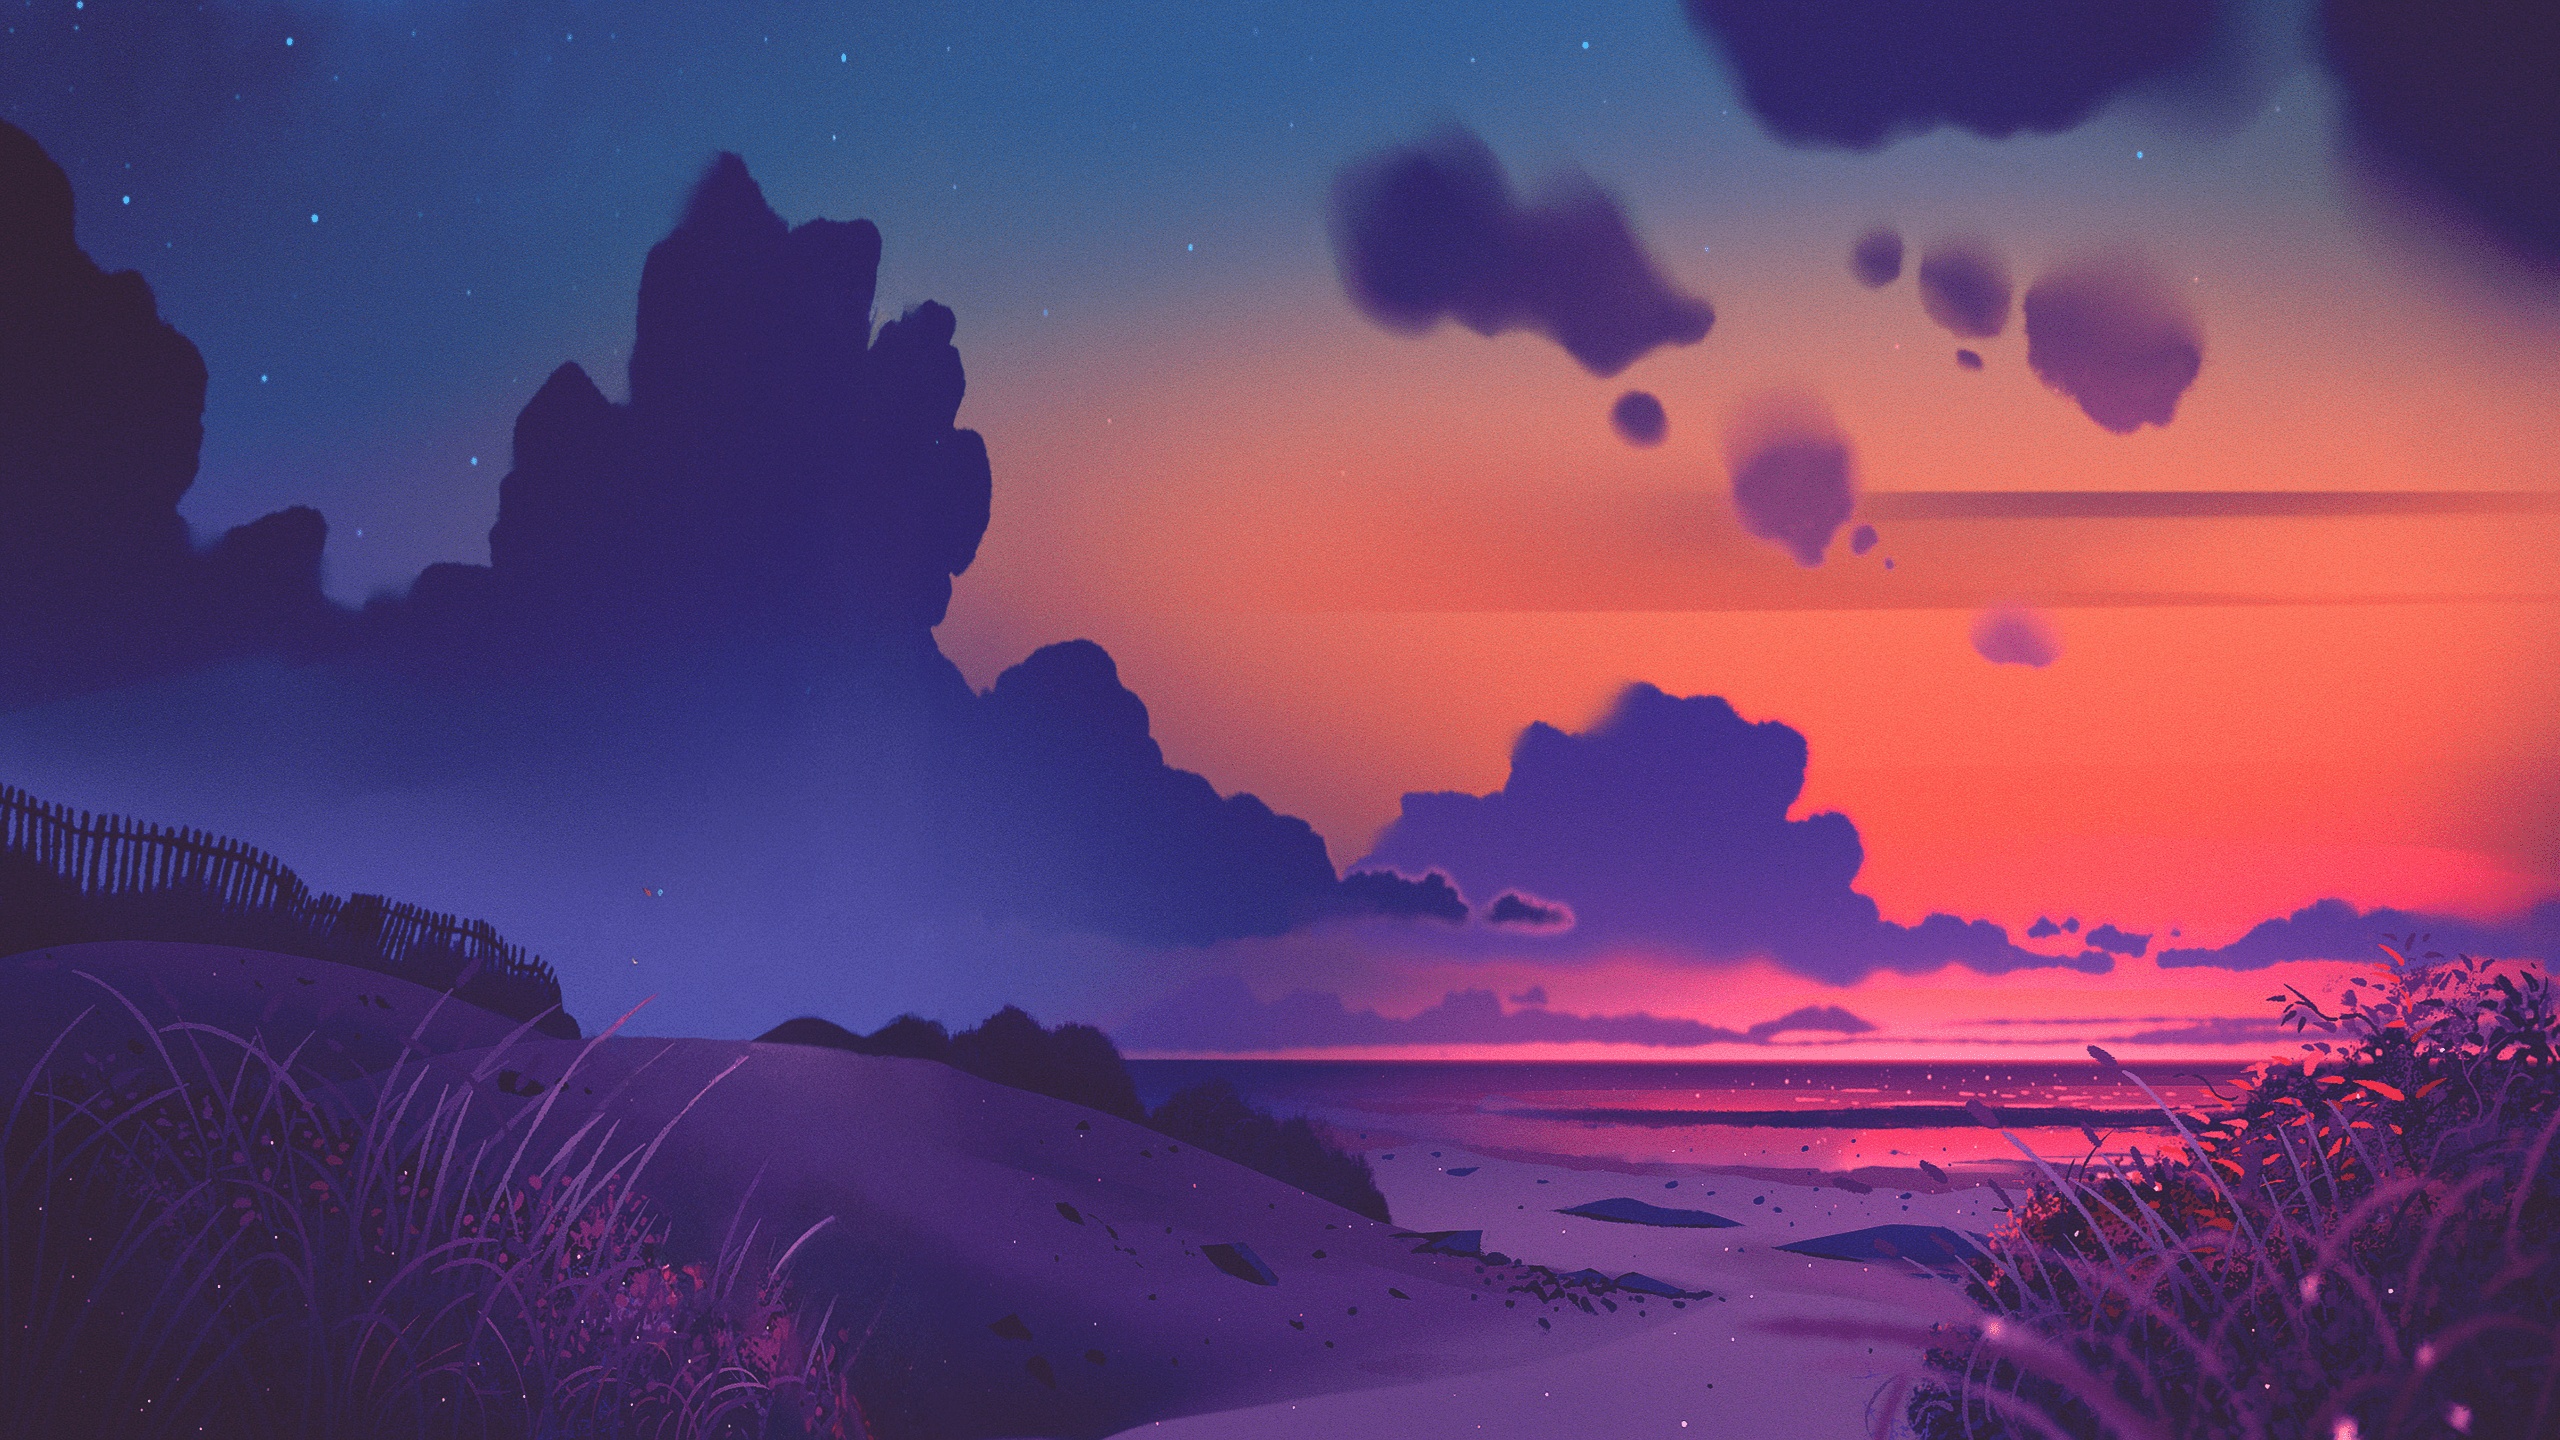 A digital painting of a beach at night with a purple and blue sky - 2560x1440